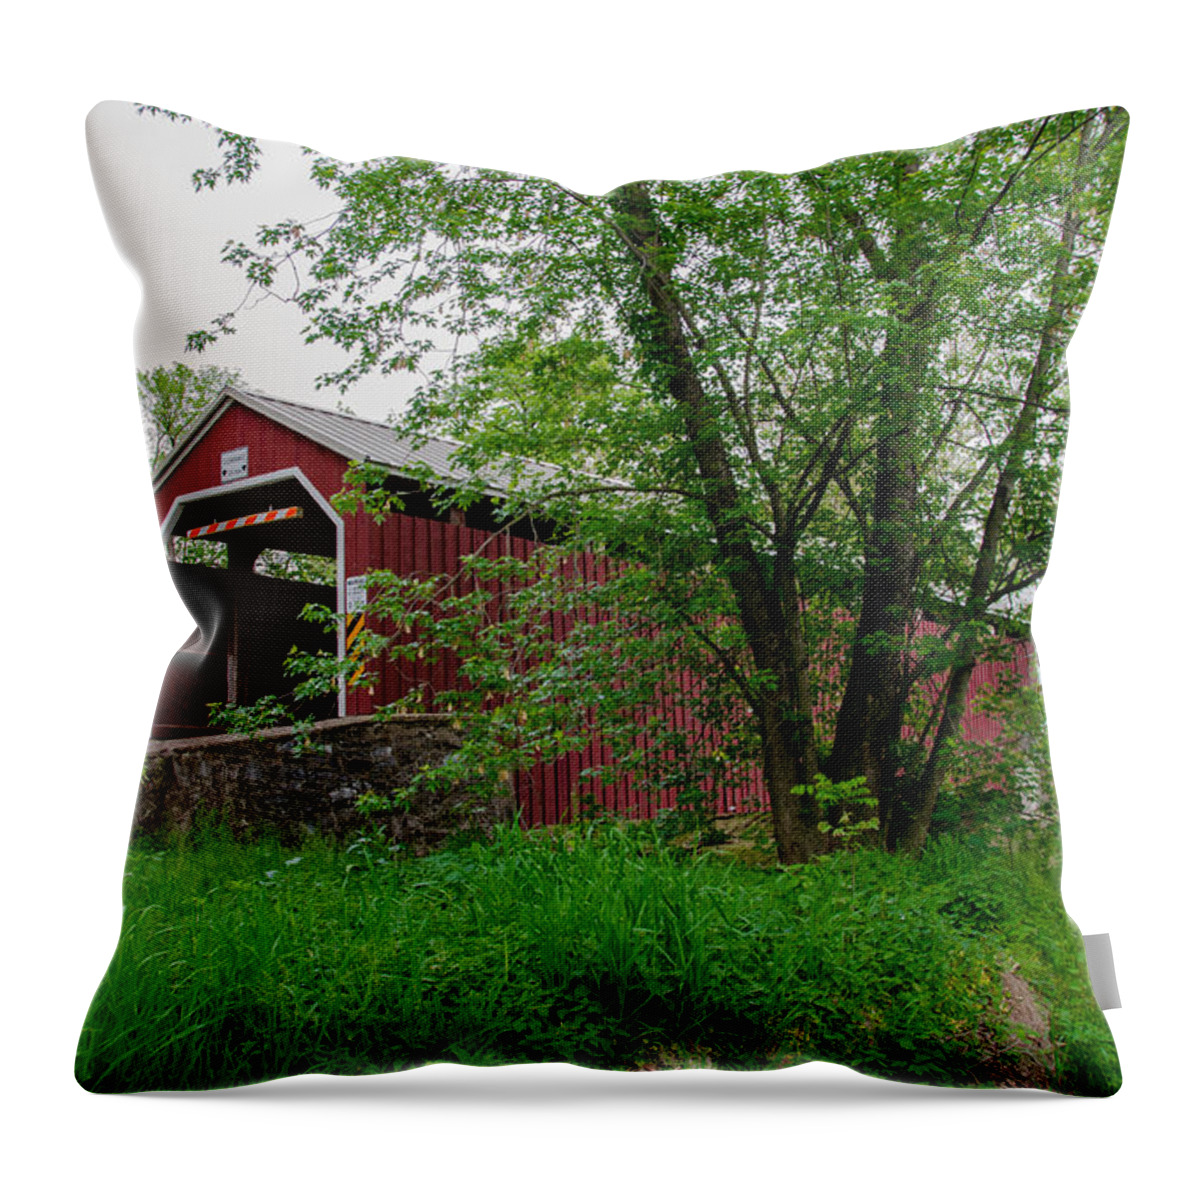 Bridges Throw Pillow featuring the photograph Rosehill Covered Bridge 2454 by Guy Whiteley